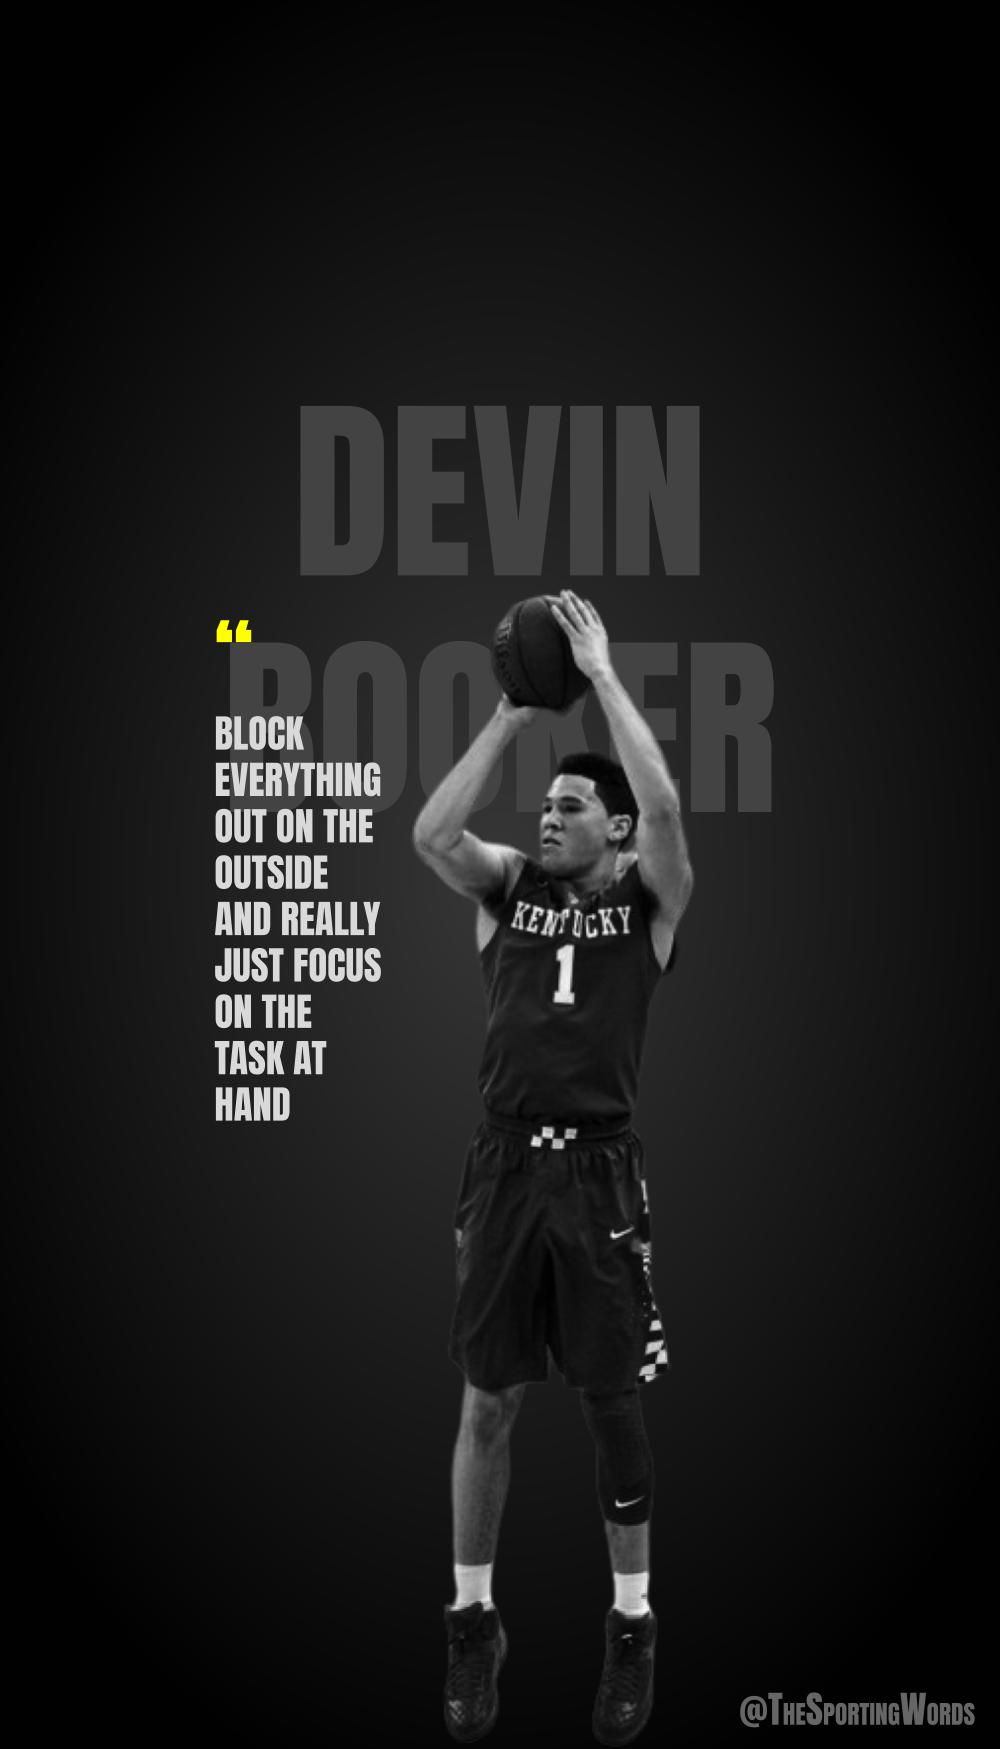 Top 64 Basketball Player Devin Booker Quotes About Success the NBA and  Life  The Sporting Words